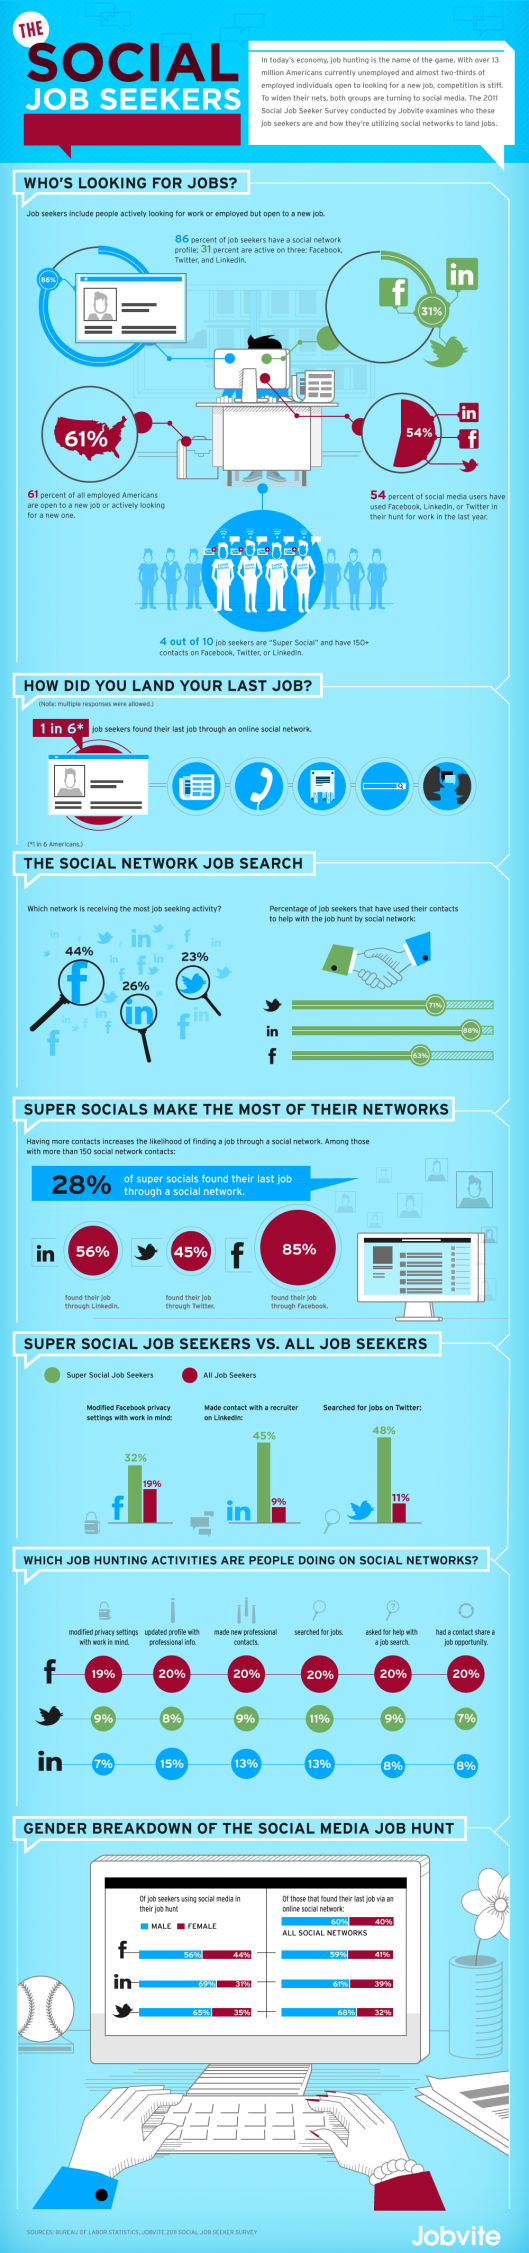 How Social Media Has Changed Job Searching